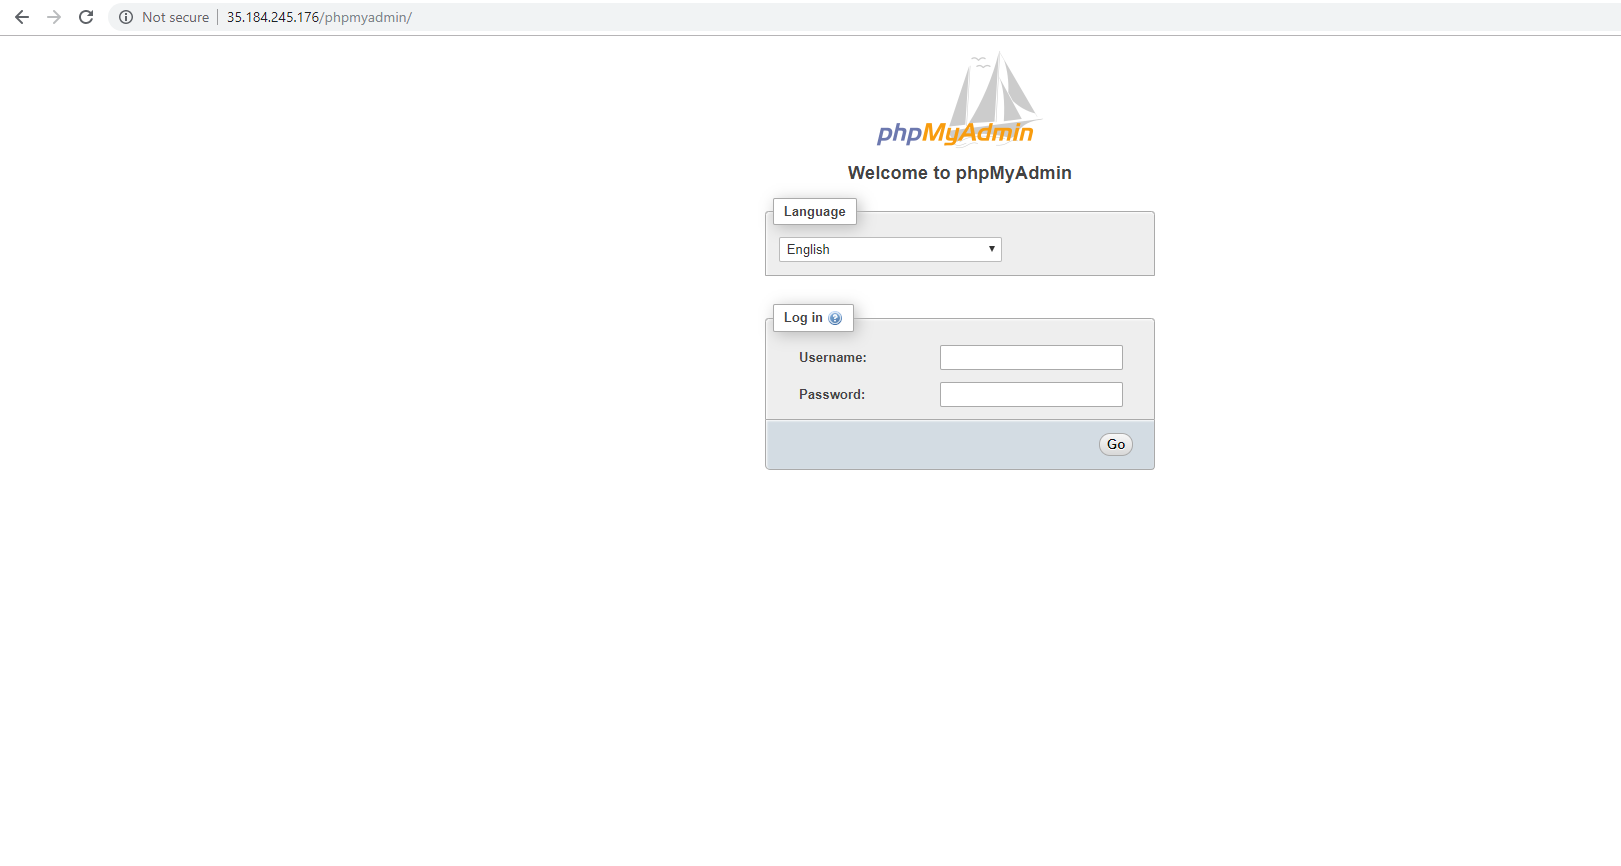 How to install phpmyadmin on centos 7